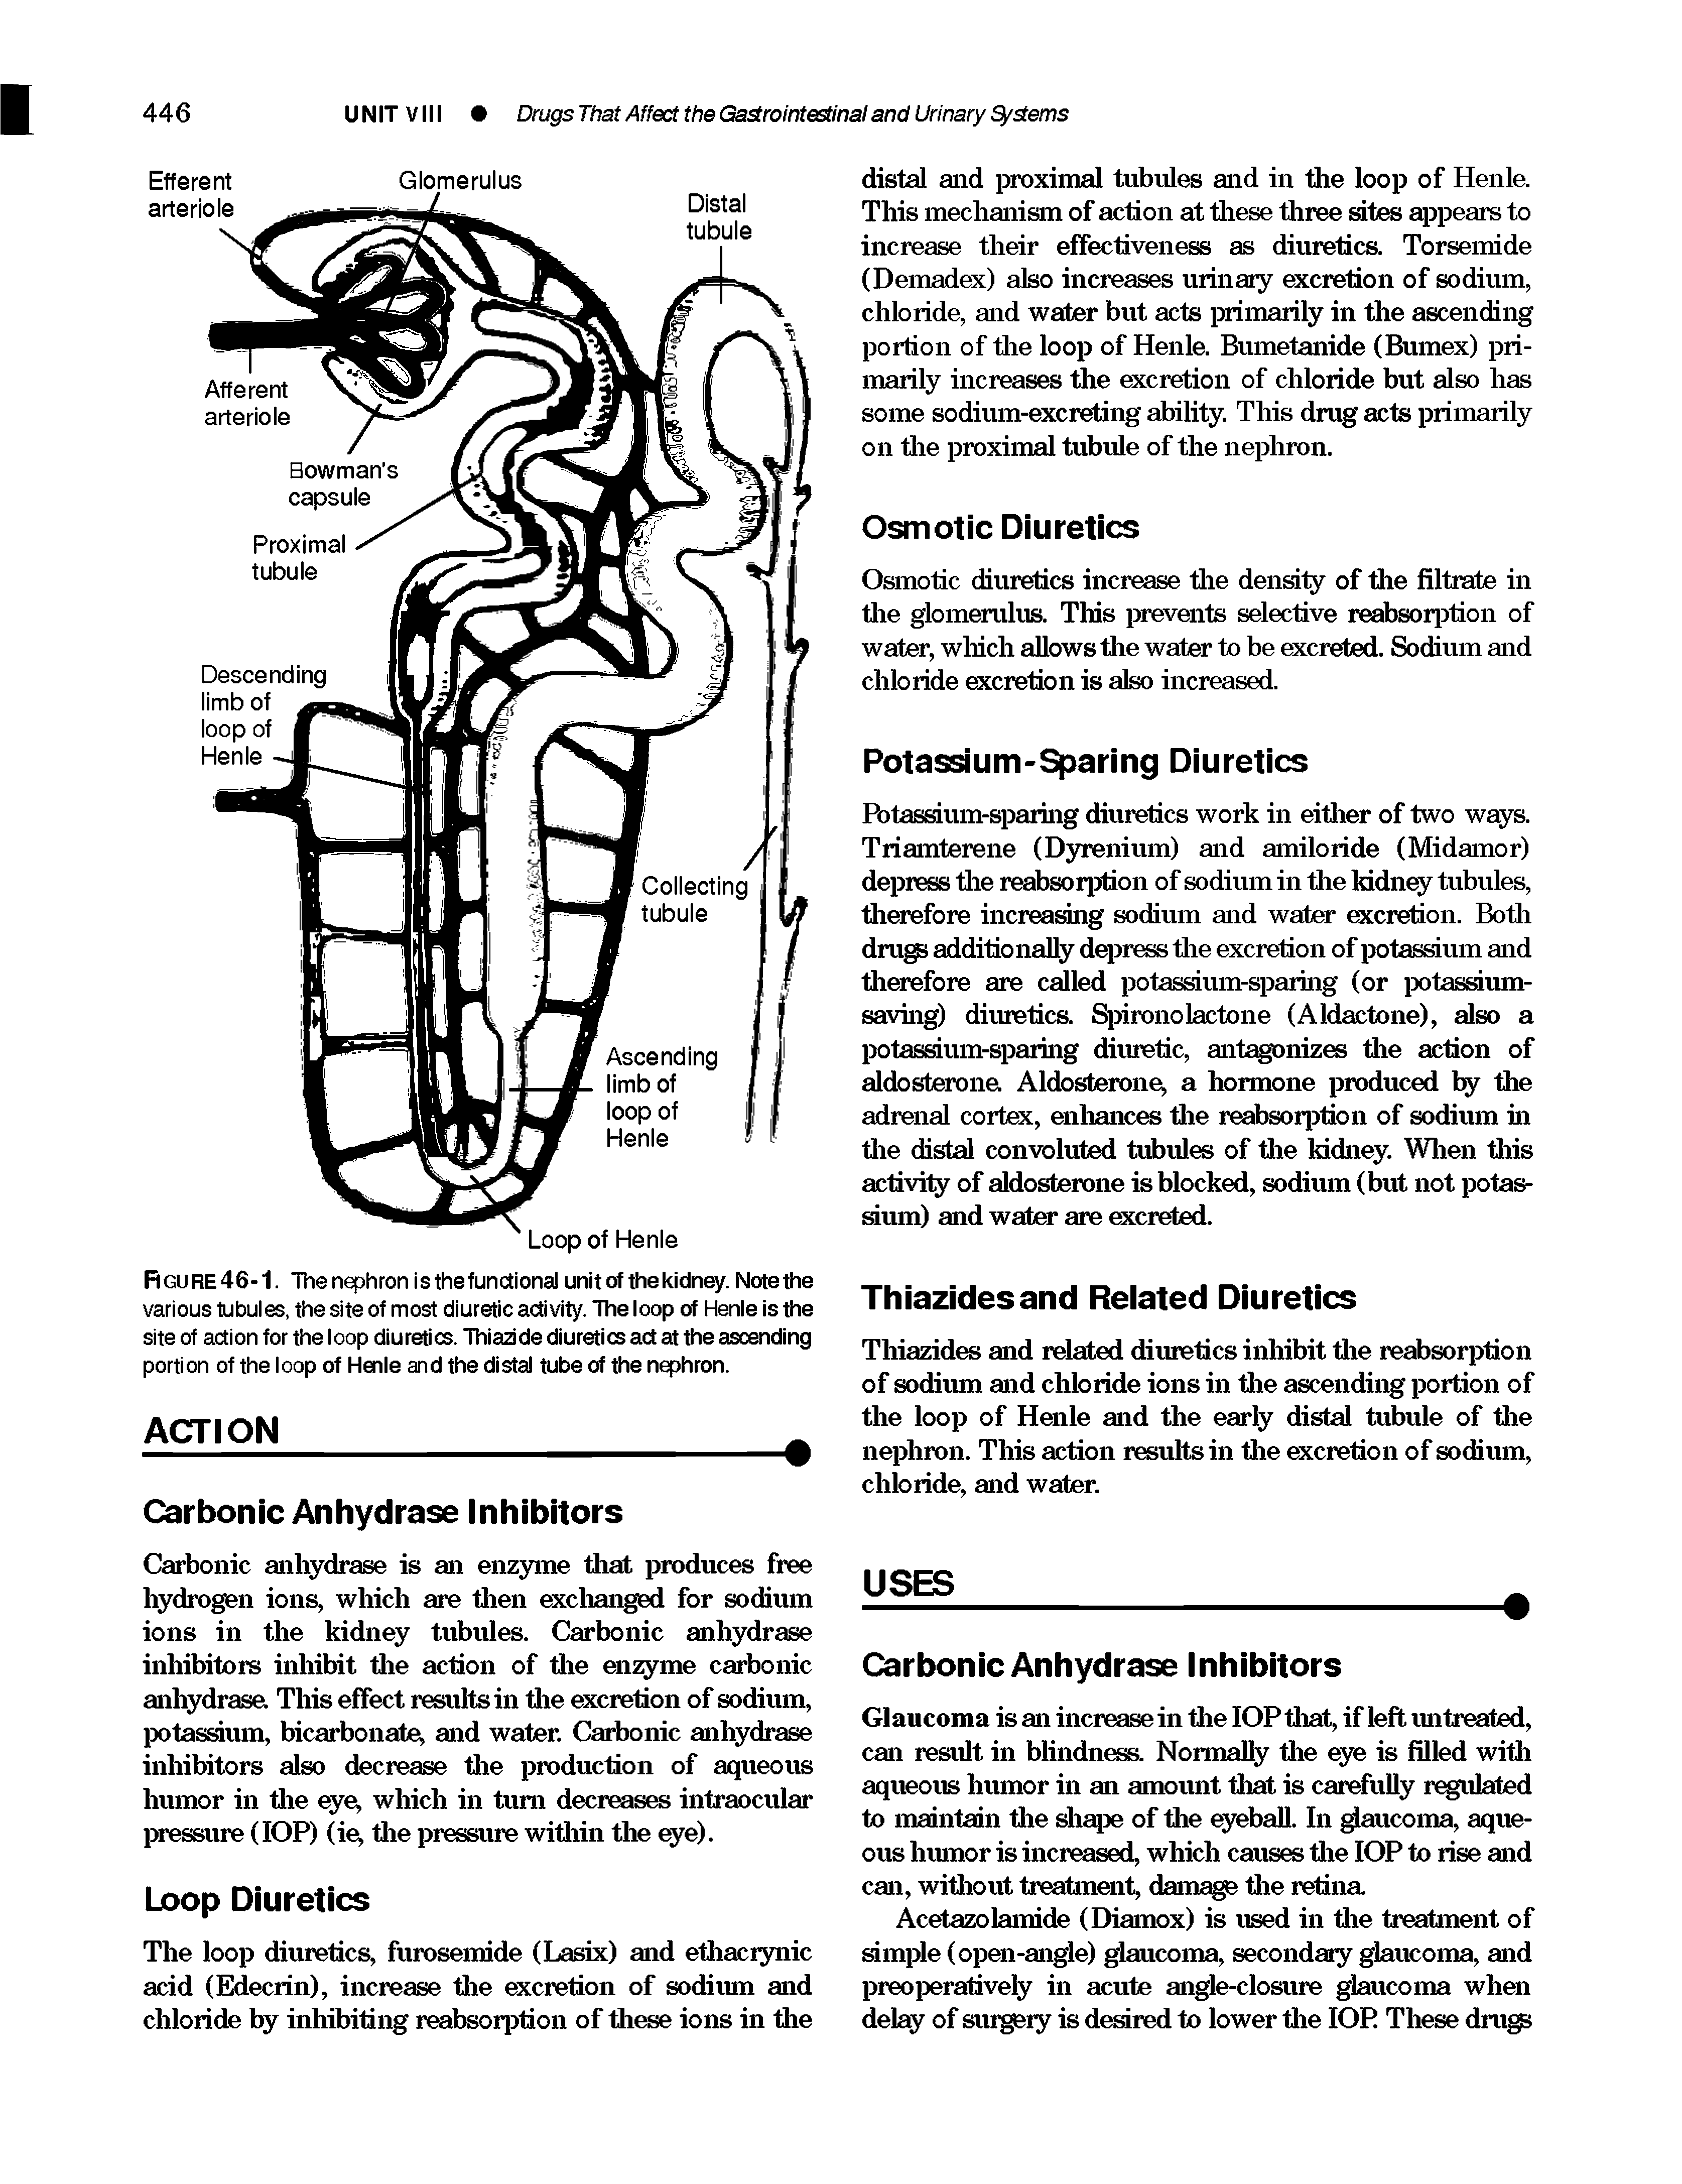 Figure 46-1. The nephron is the functional unit of the kidney. Note the various tubules, the site of most diuretic activity. The loop of Henle is the site of action for the loop diuretics. Thiazide diuretics ad at the ascending portion of the loop of Henle and the distal tube of the nephron.